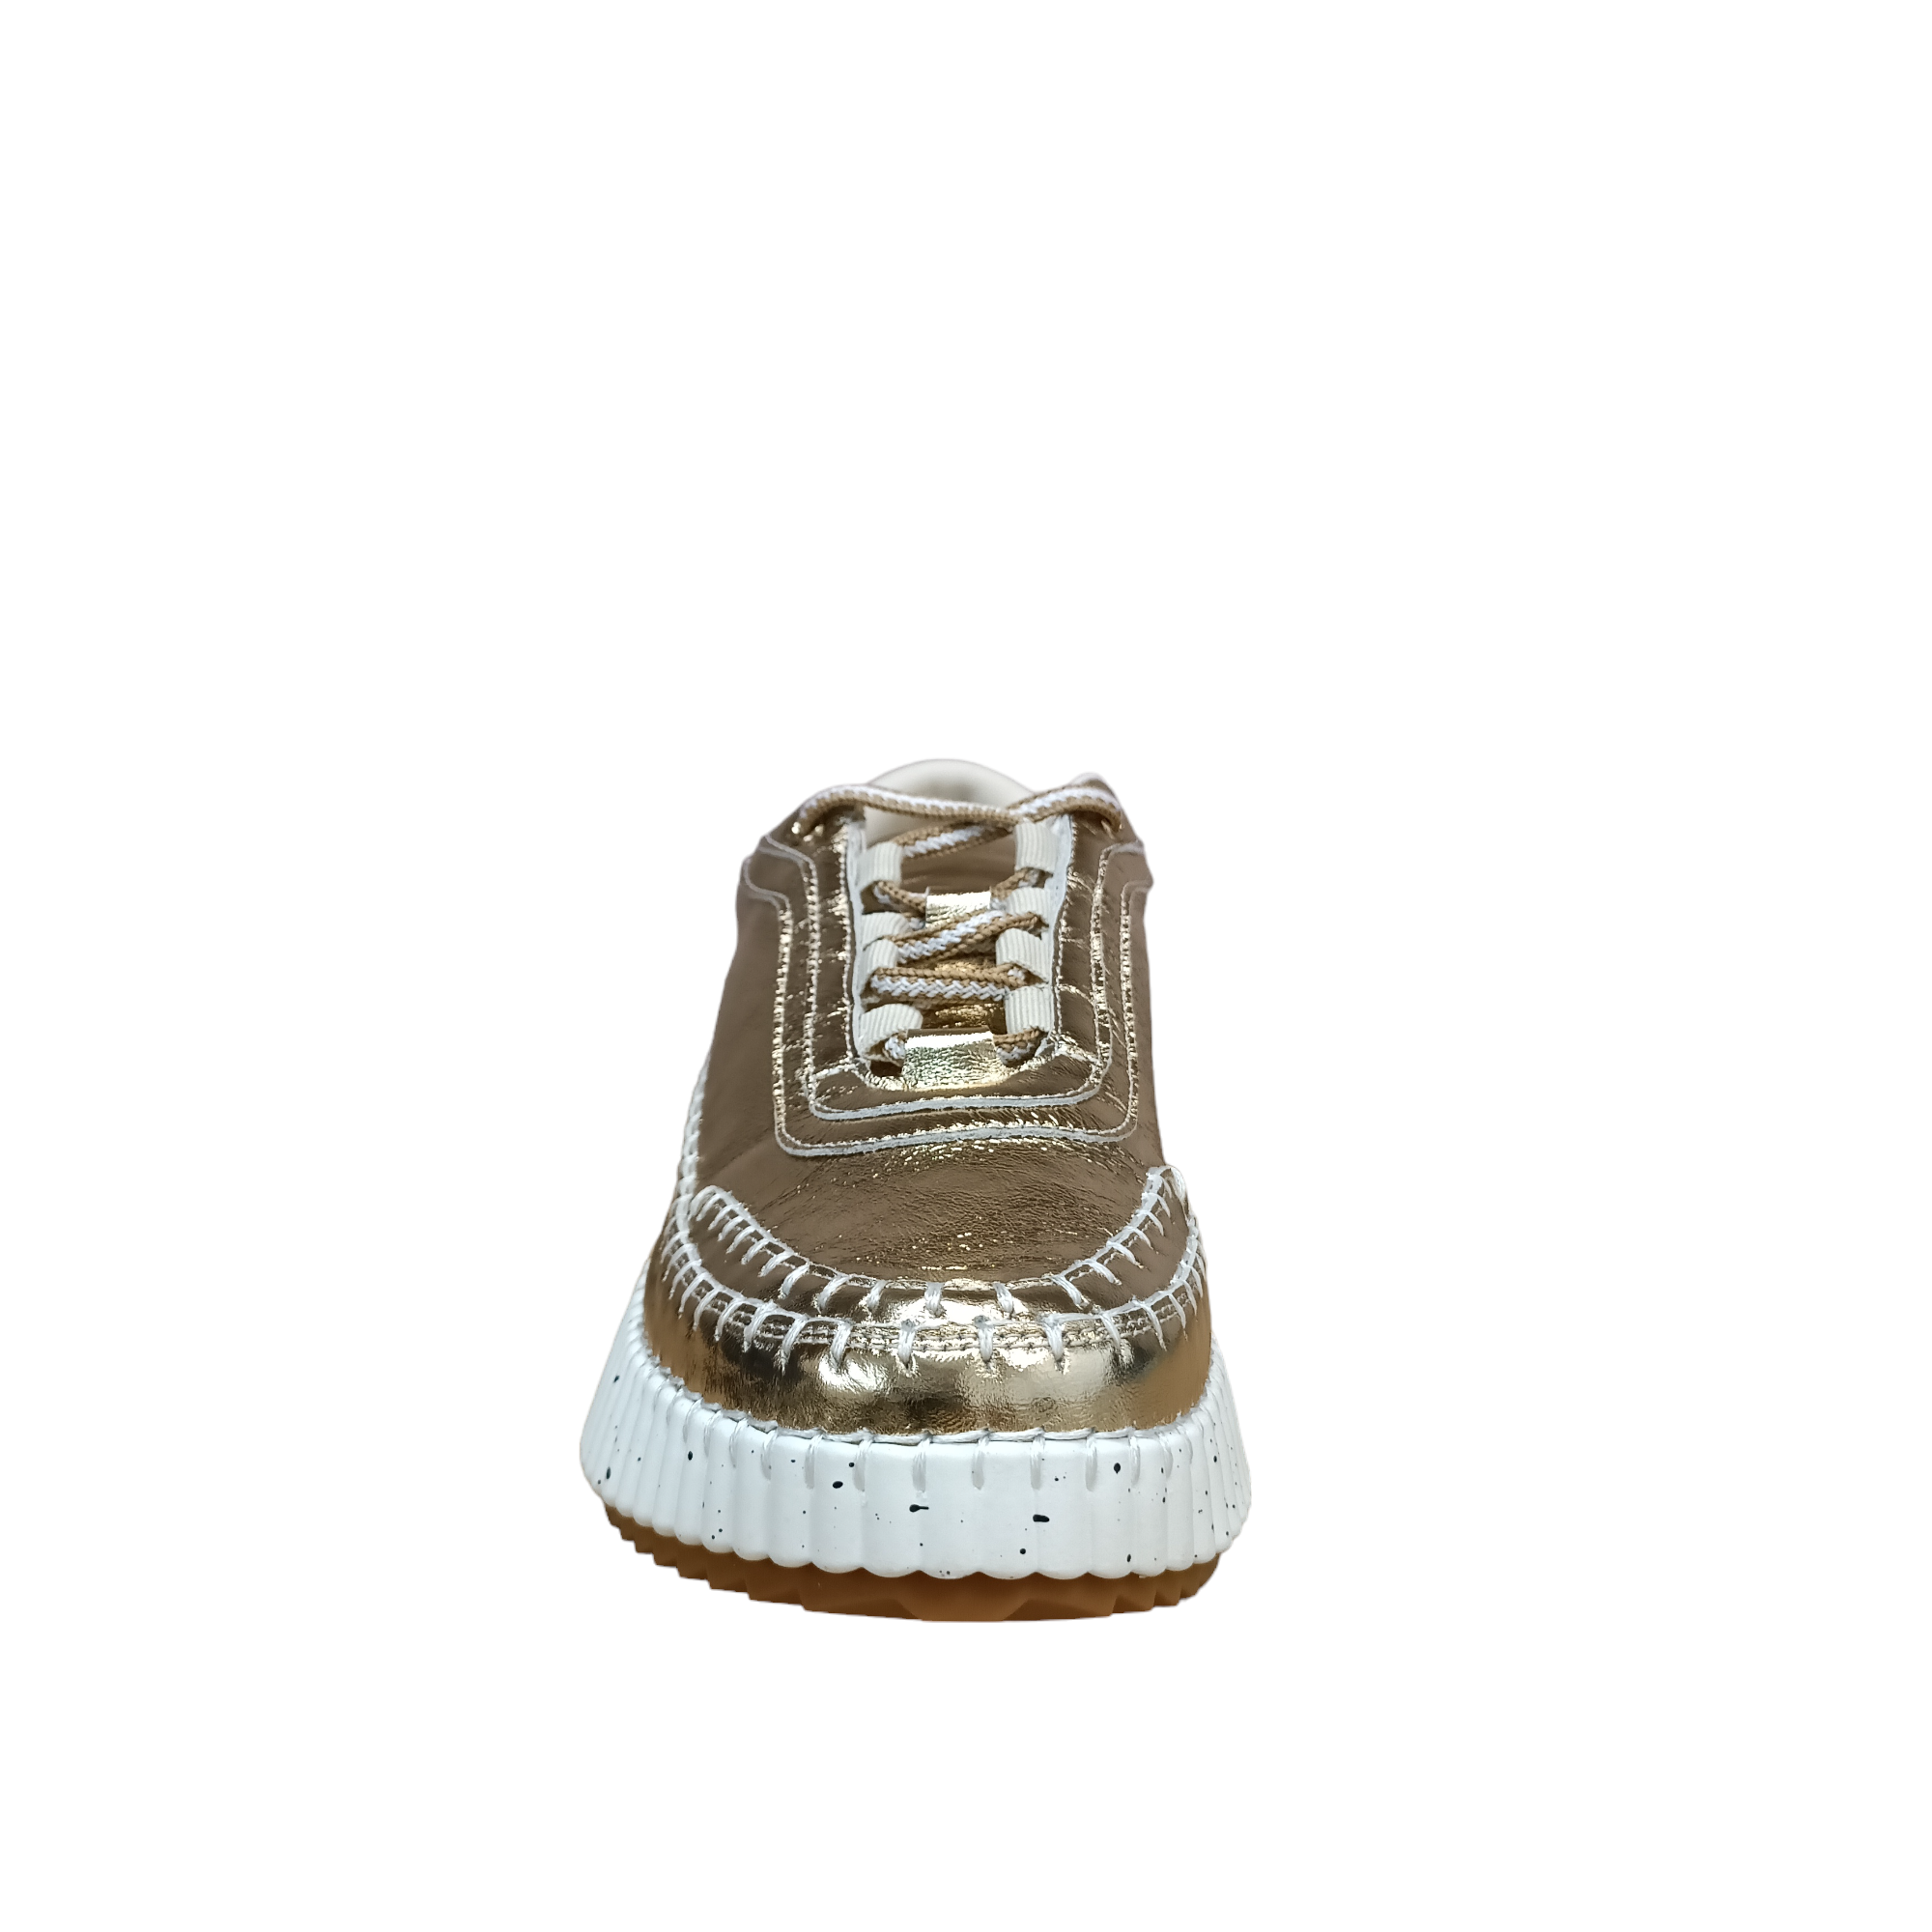 Front view of a bright gold Gelato sneaker with a white speckled sole. White bright stitching joining the upper with the botton part of the shoe. shop womens winter sneakers shoe&amp;me NZ